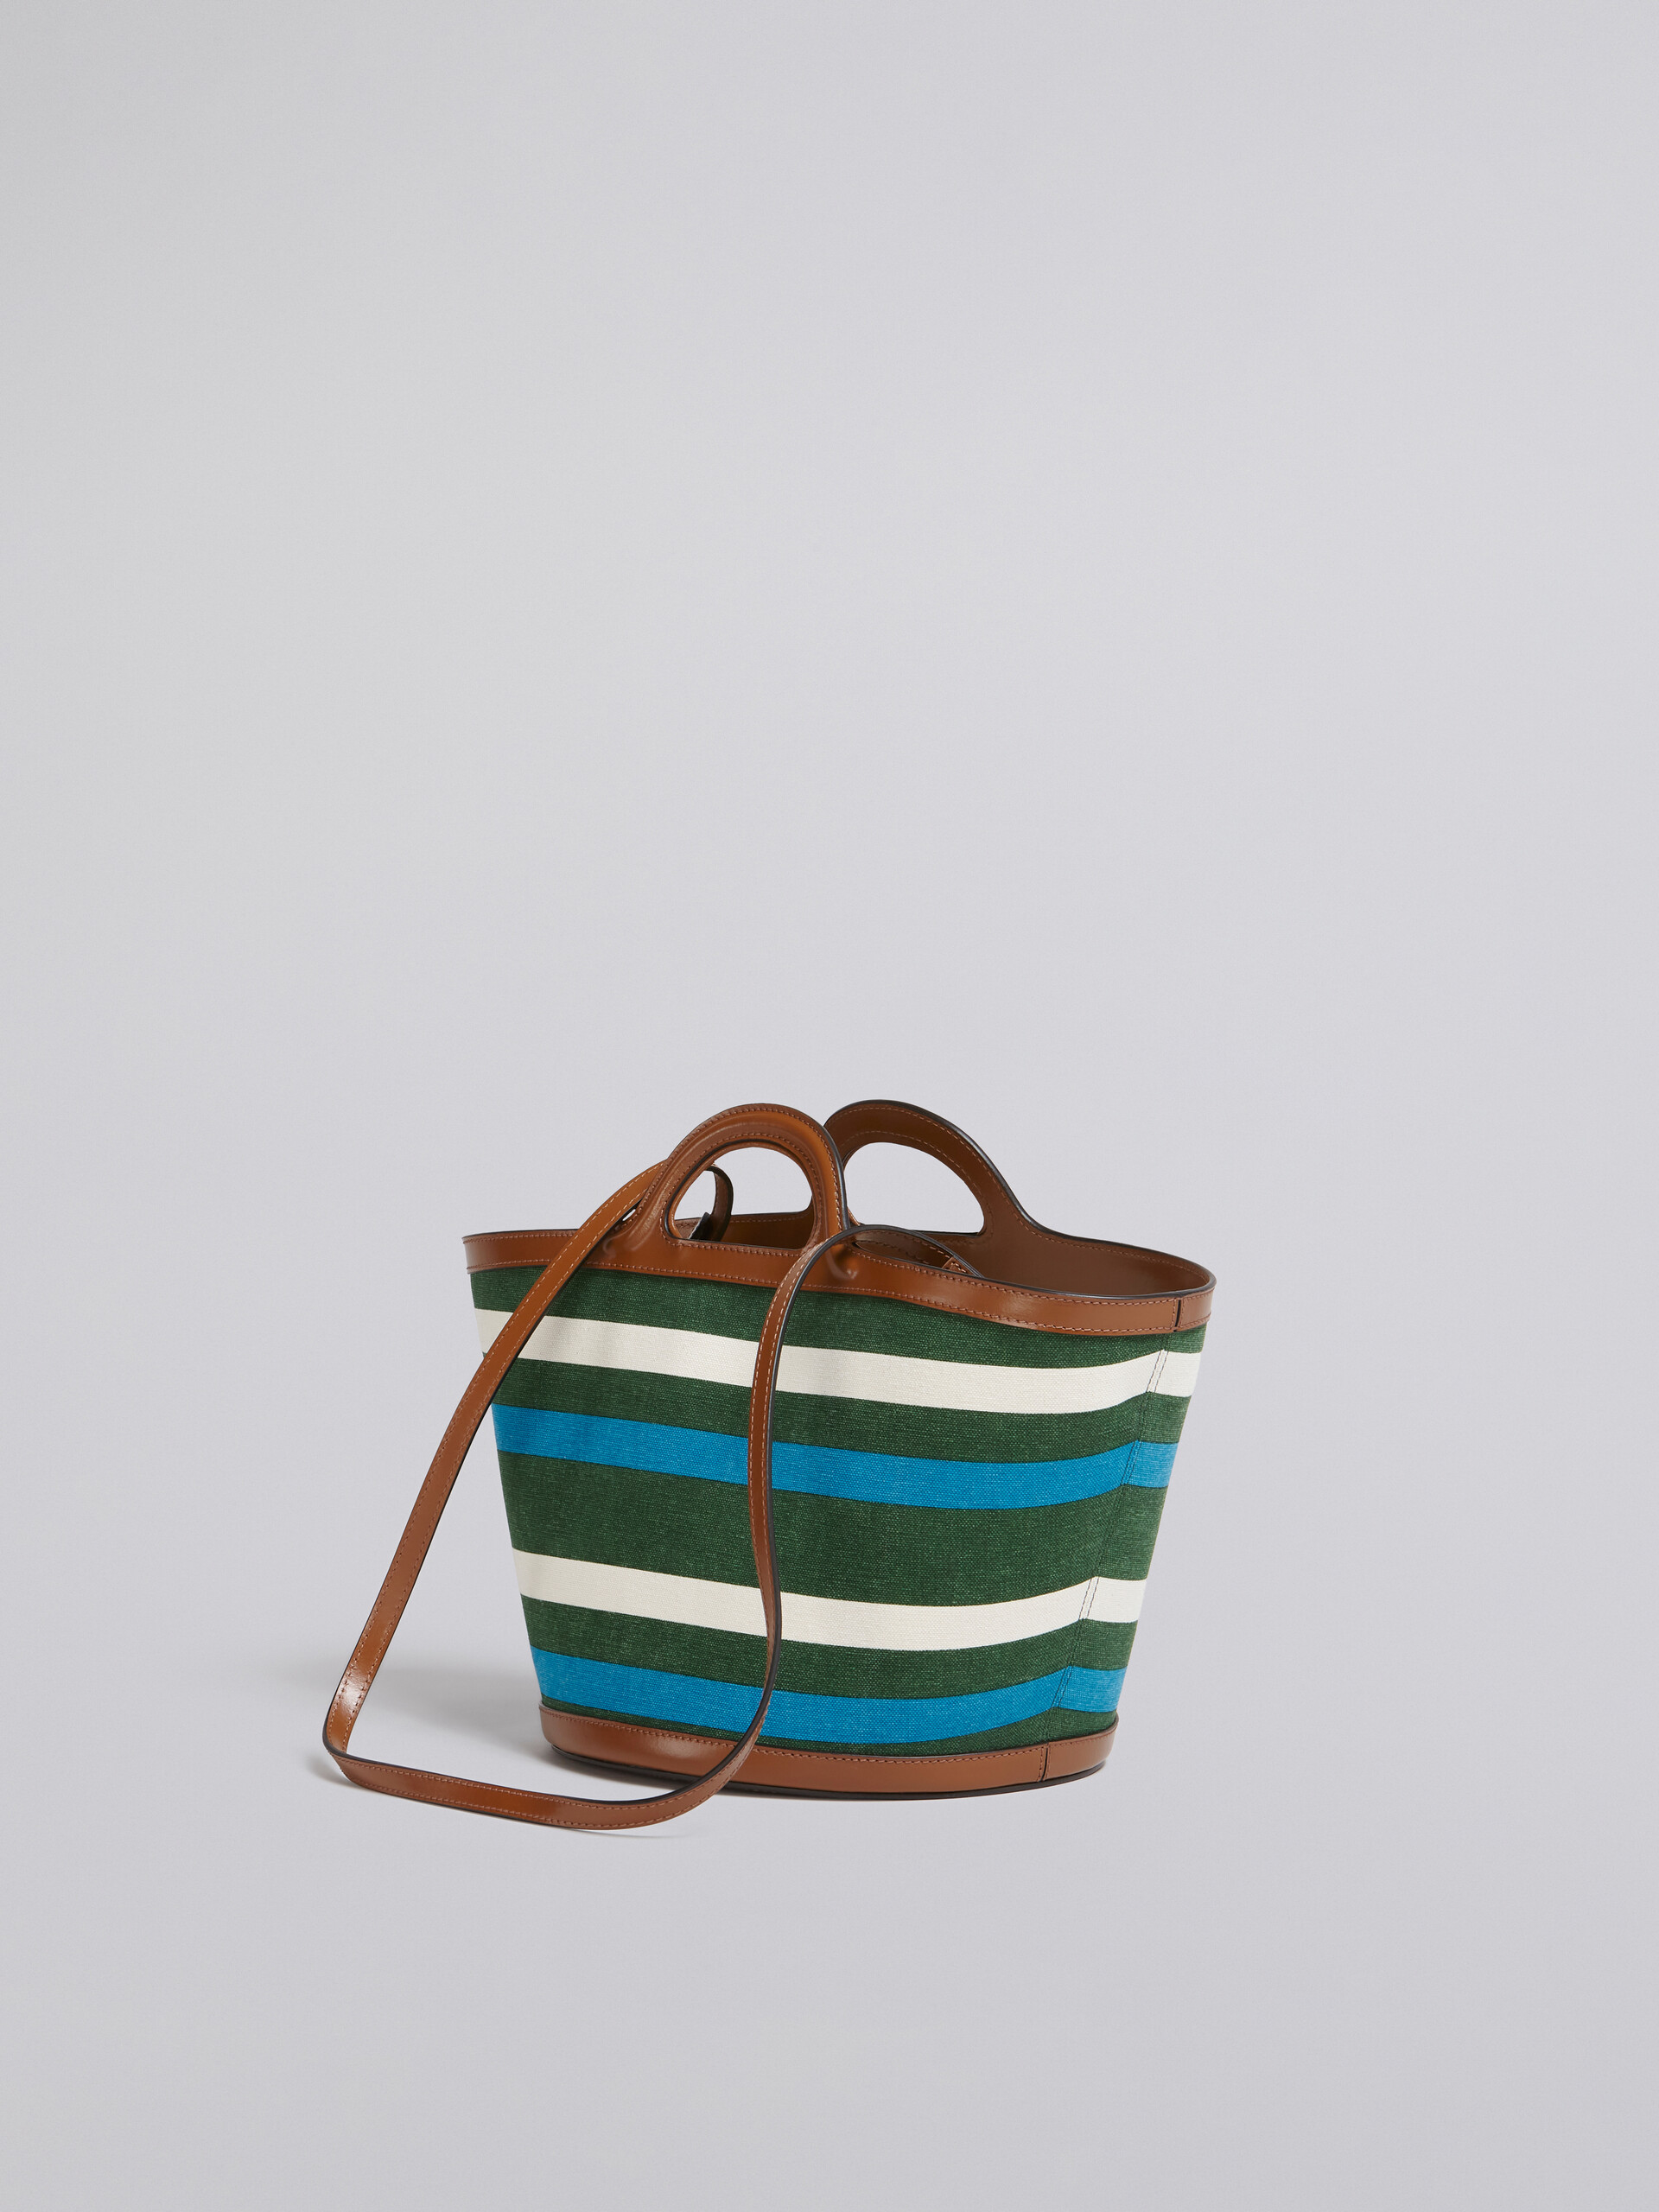 TROPICALIA small bag in leather and striped canvas - Handbags - Image 3